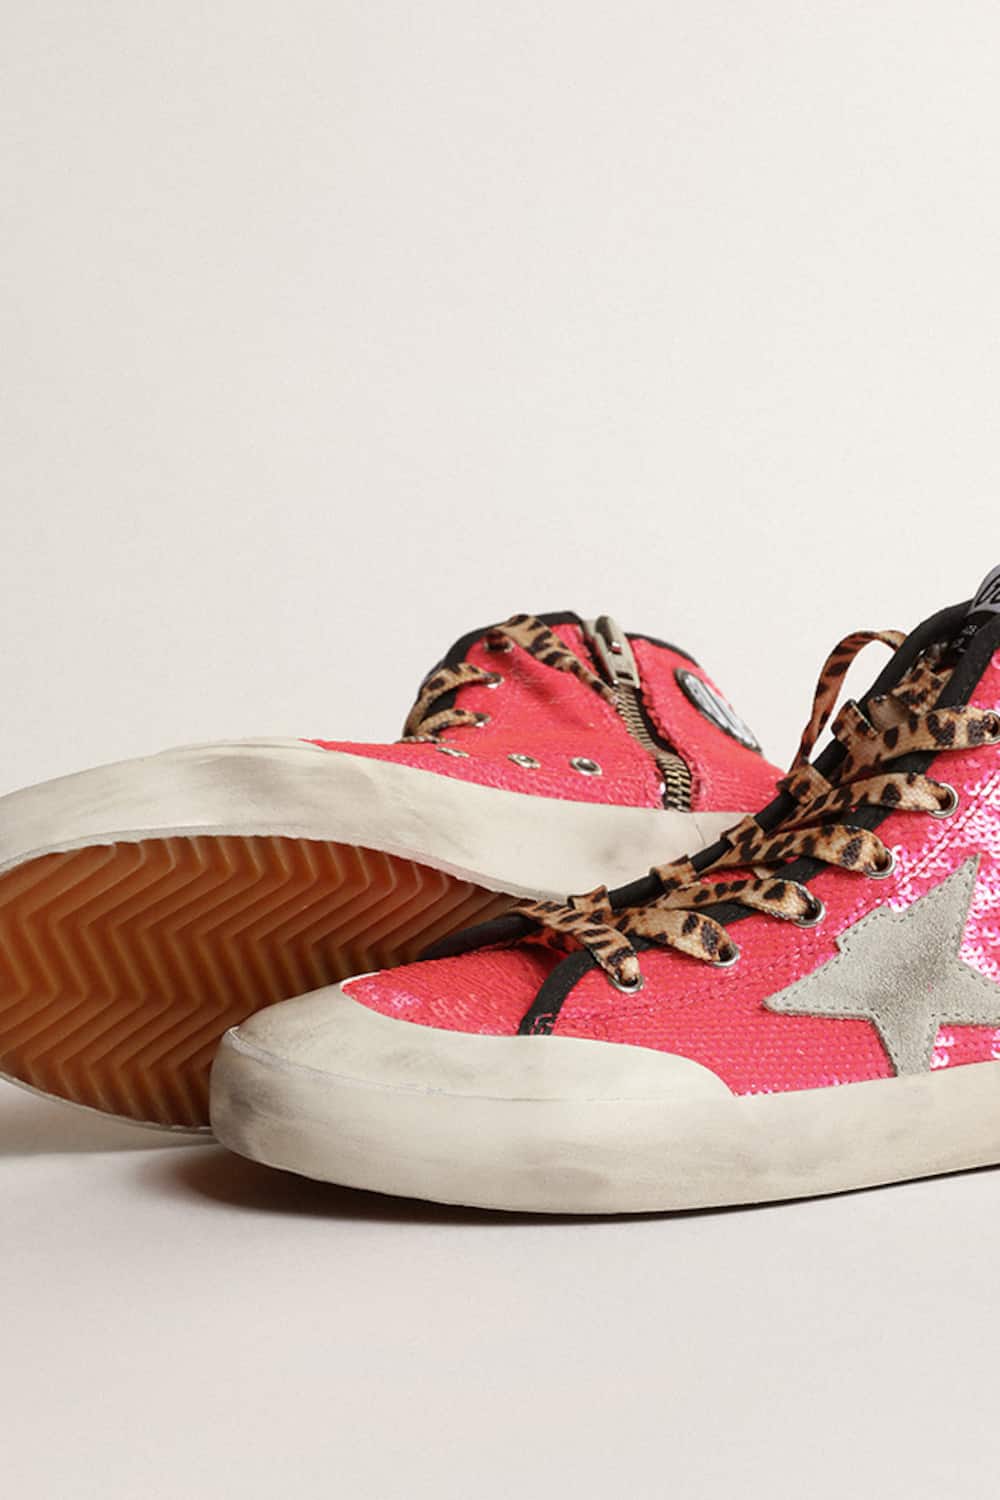 Golden Goose - Young Francy Penstar in fluorescent pink sequins with hand lettering on the sole in 